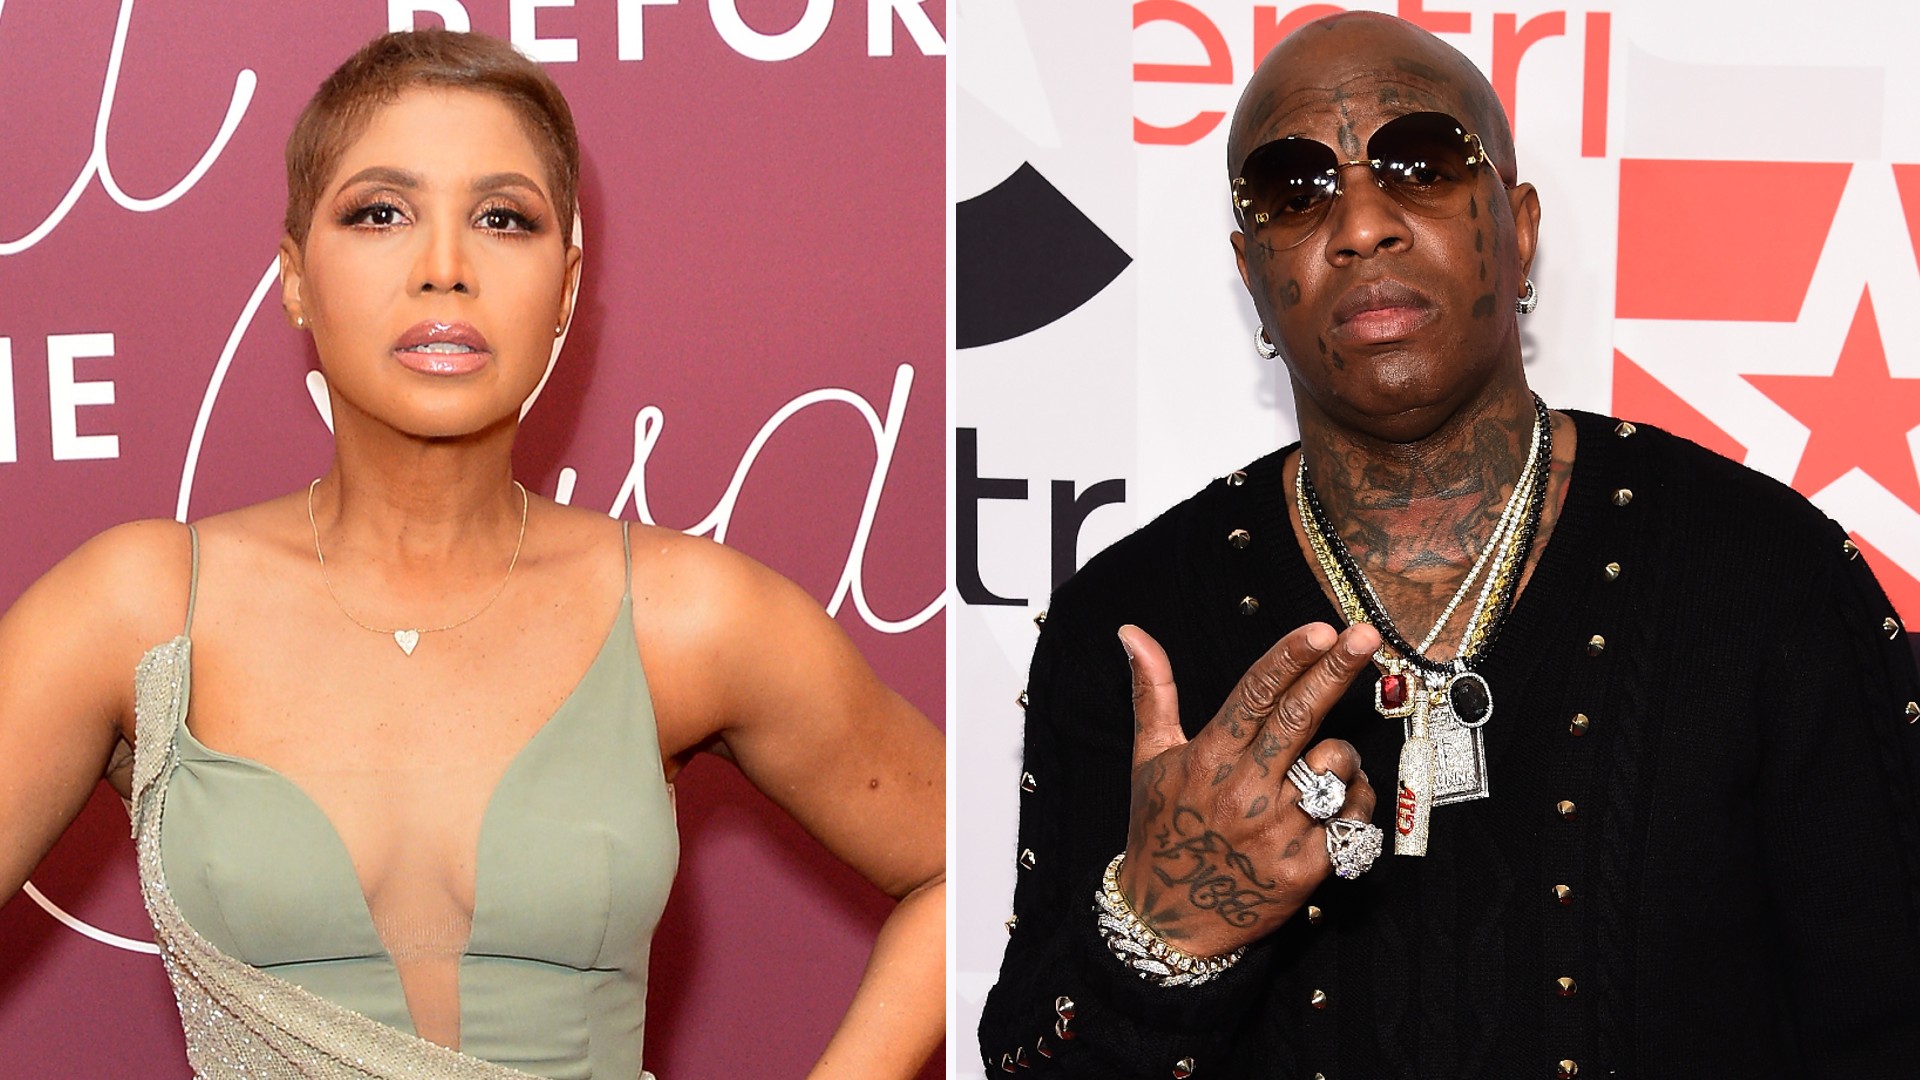 Toni Braxton Denies Rumor Claiming She Secretly Married Birdman In Mexico- We Are Both Single